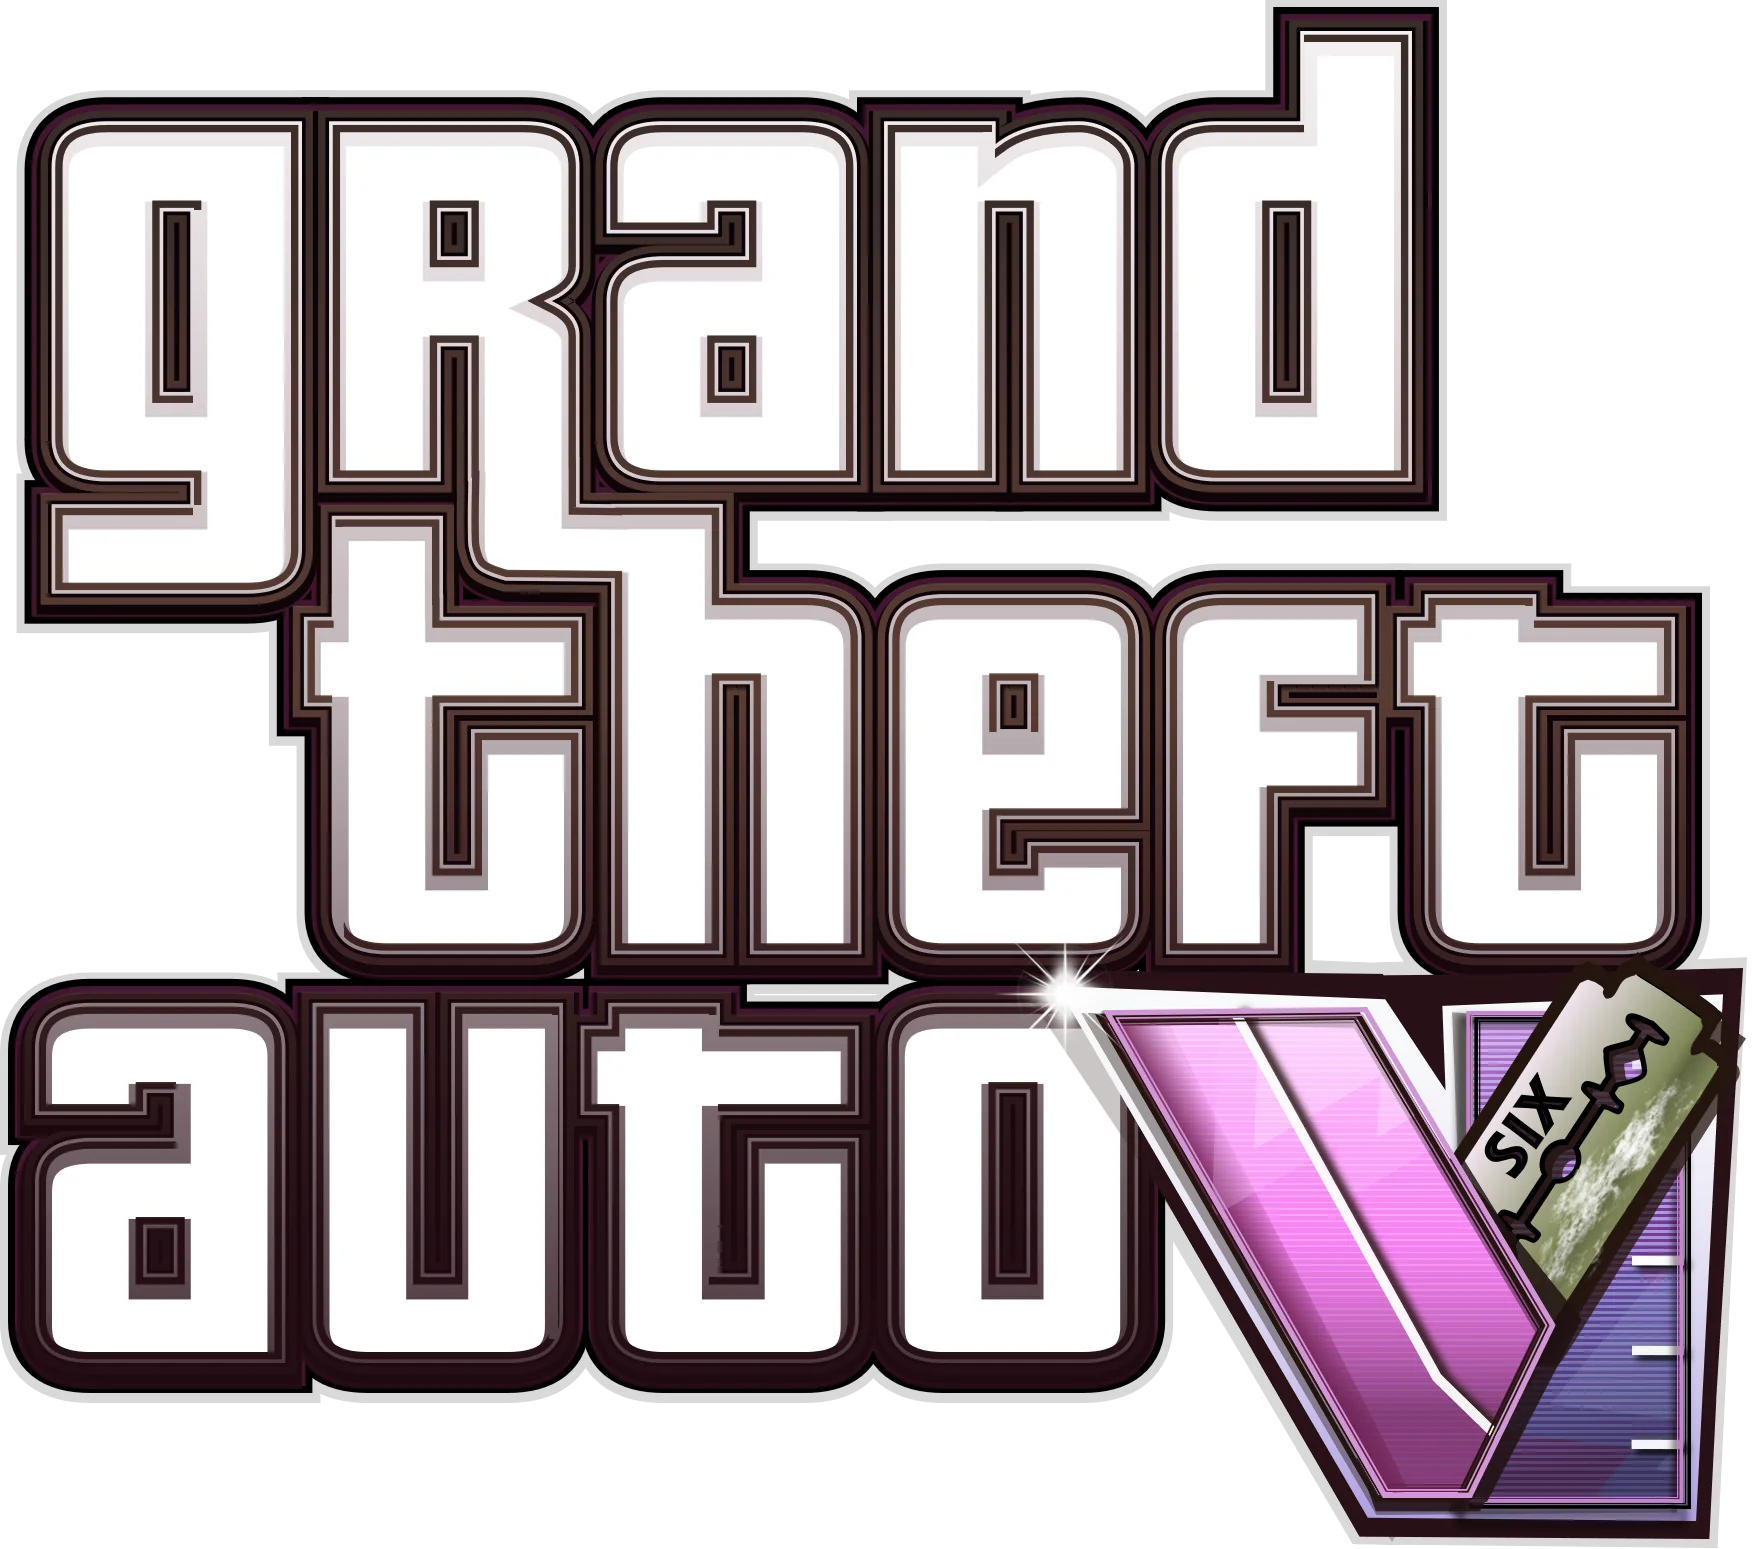 Grand Theft Auto 6 PNG Image